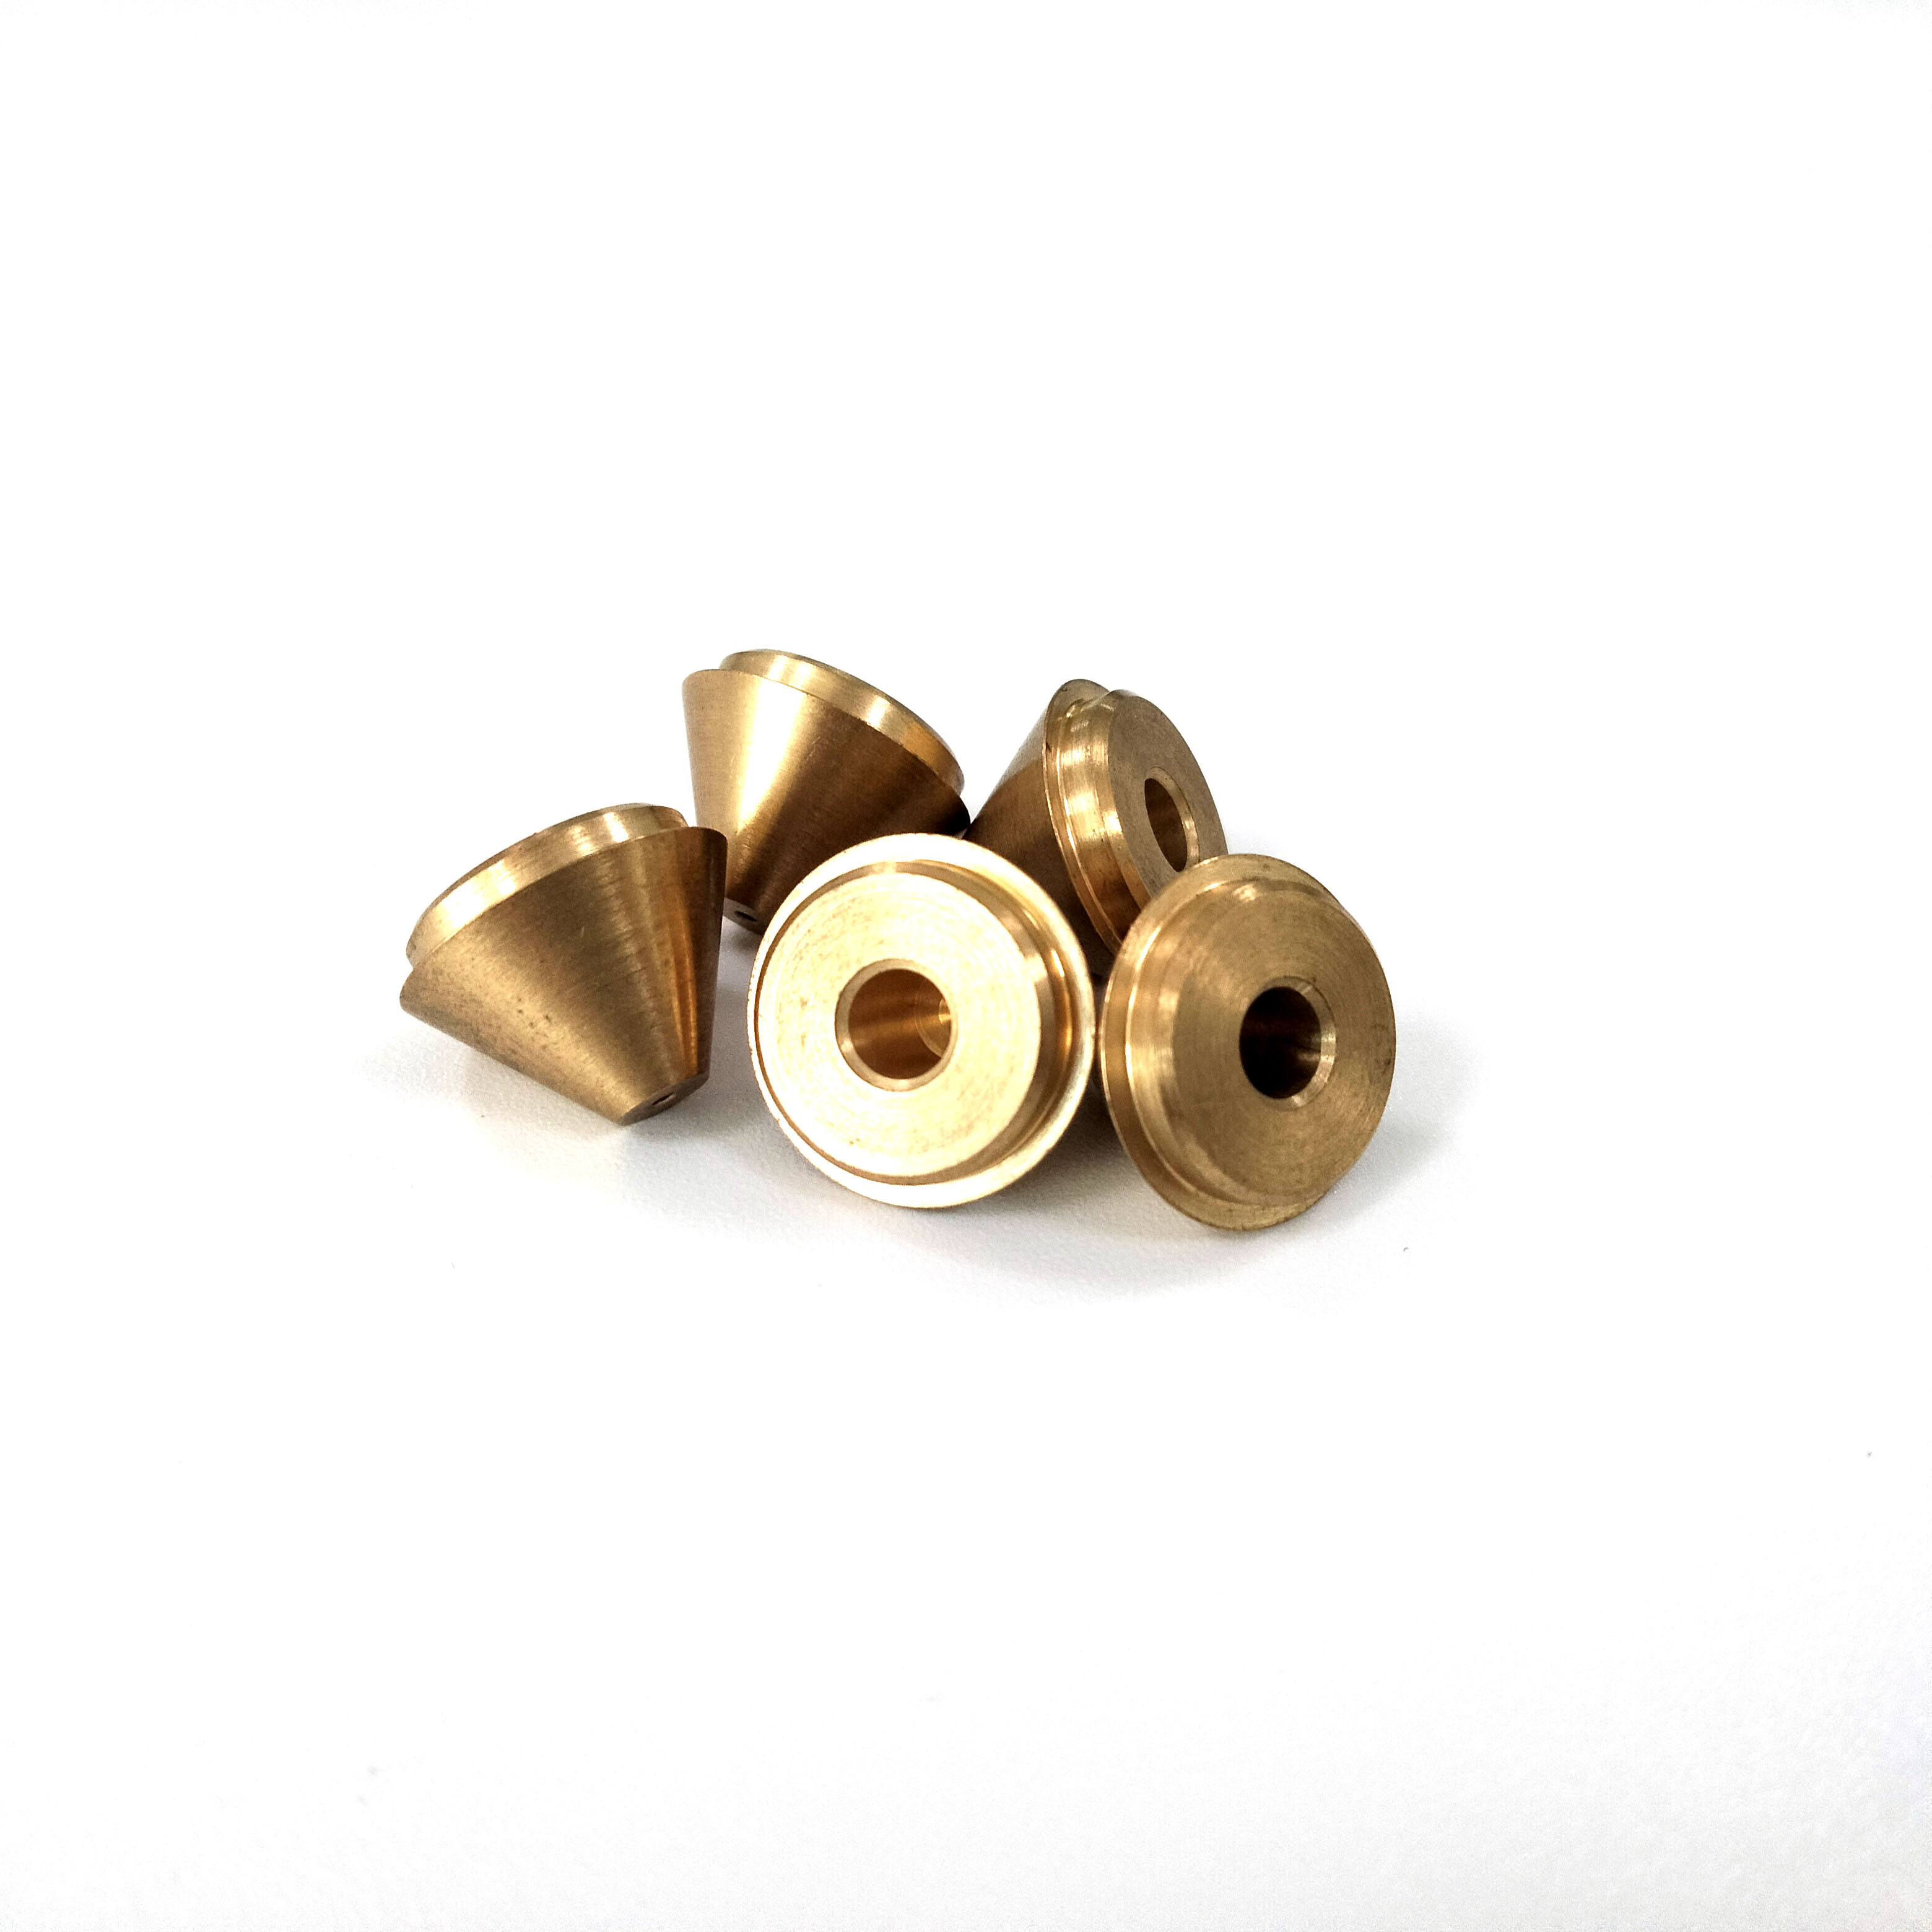 Brass Cone Sprinkler CNC Machining Turning Chengshuo Hardware By Mia & Corlee